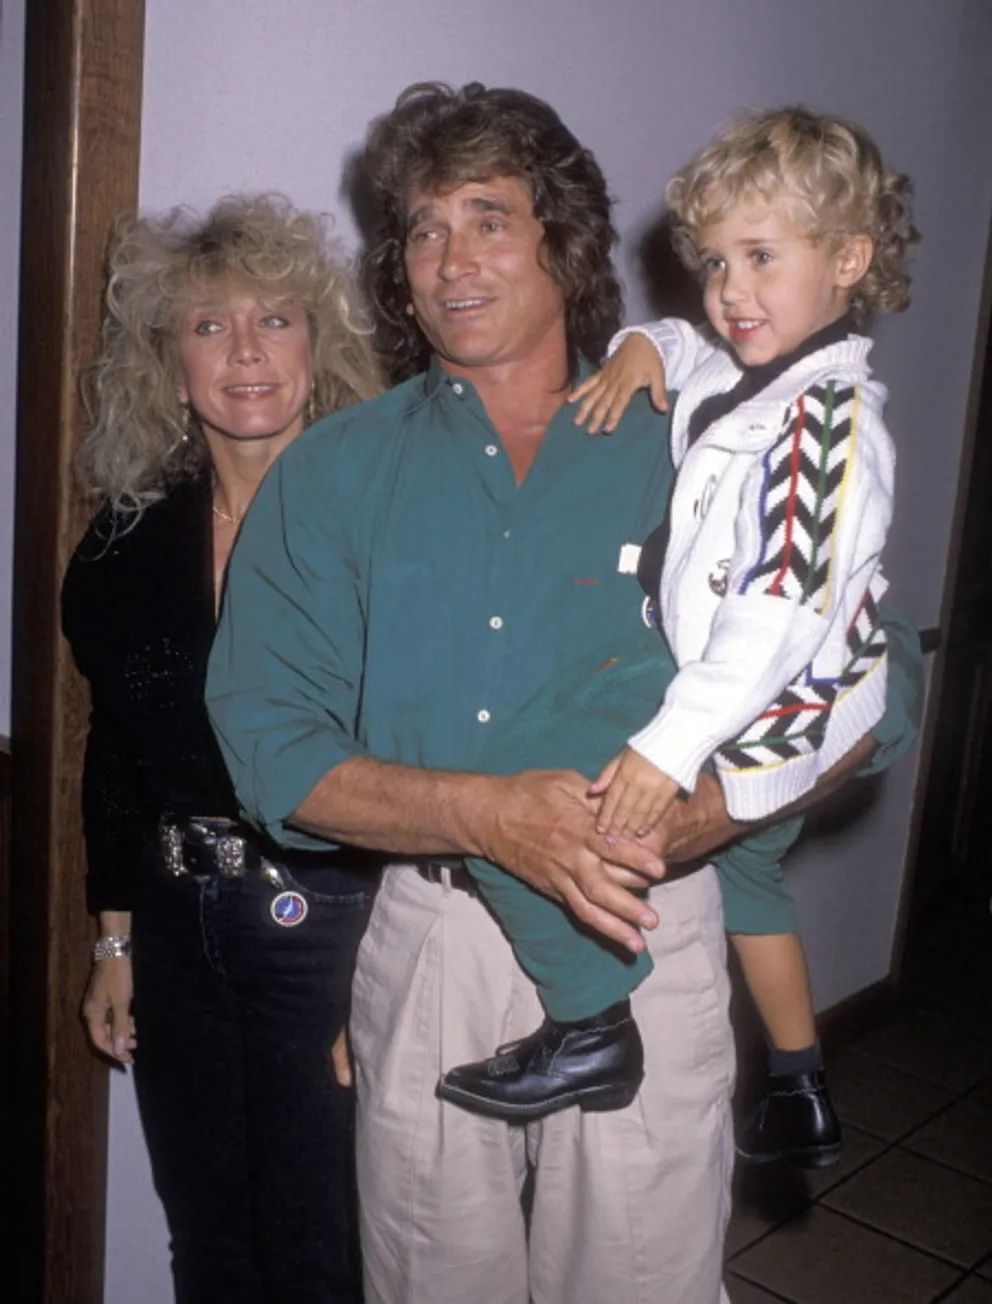 Michael Landon, wife Cindy Landon and son Sean Landon at the Moscow Circus Opening Night Performance on March 14, 1990 at the Great Western Forum in Inglewood | Source: Getty Images